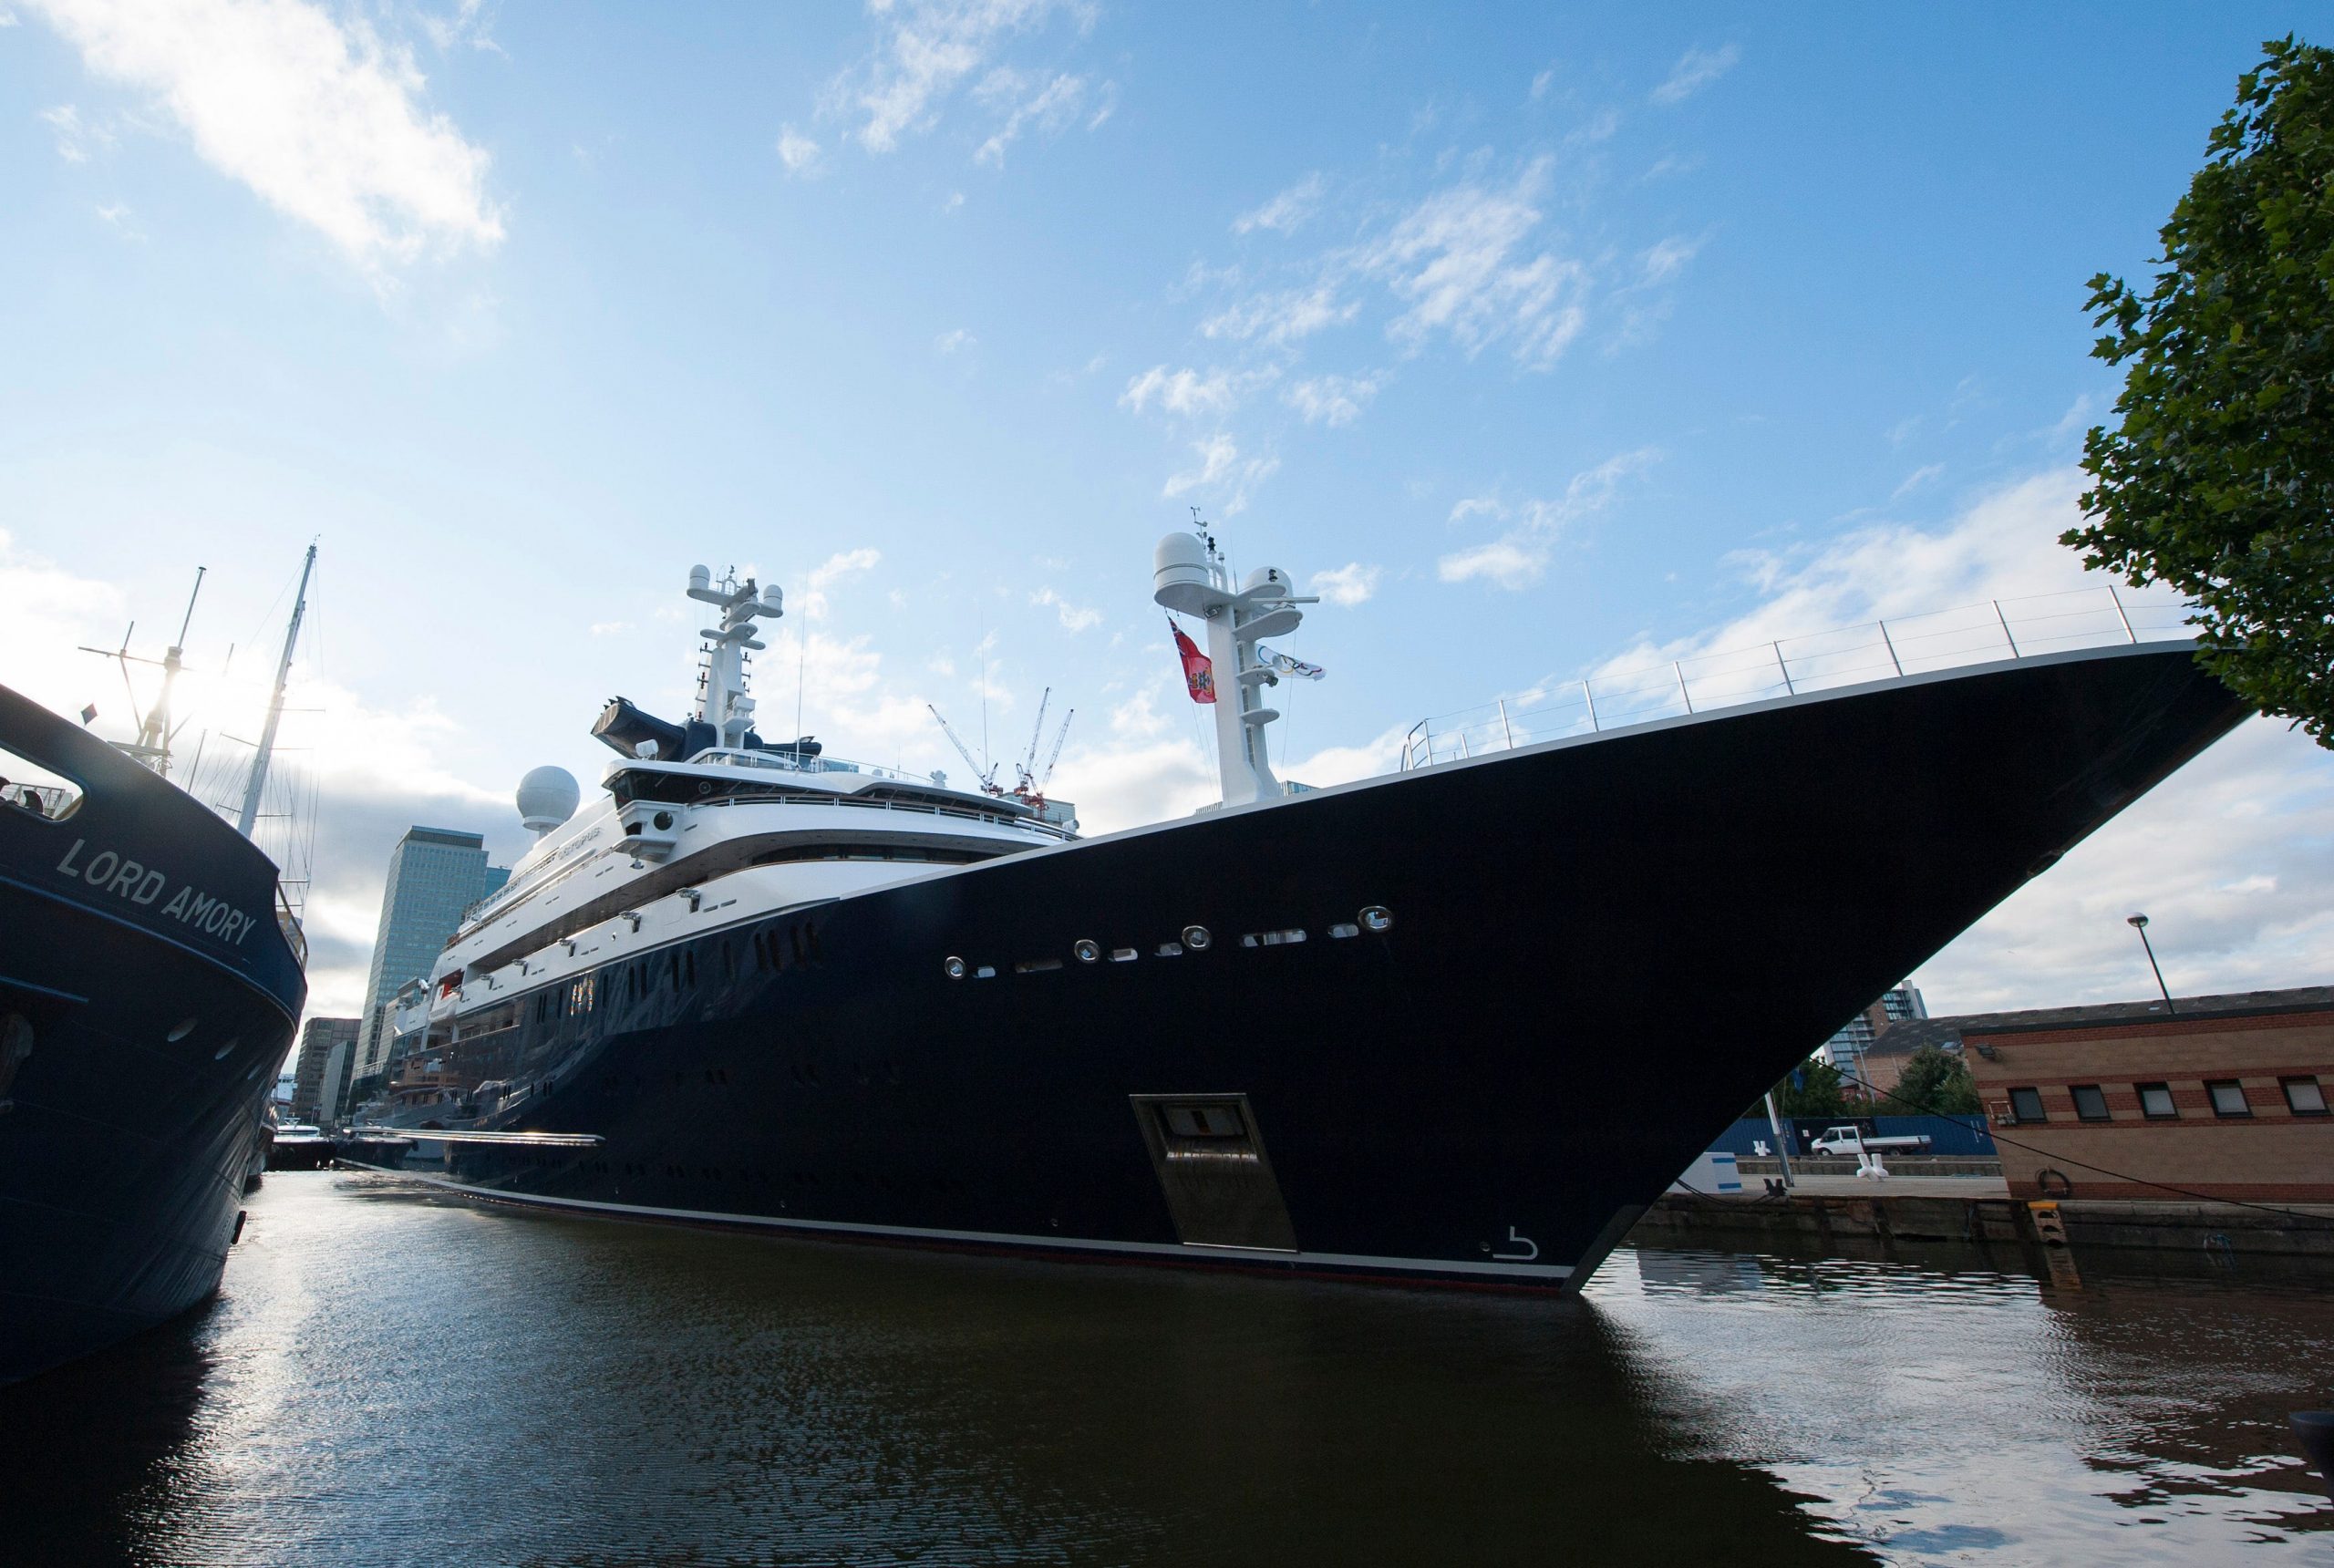 The blue hull of the luxury yacht "Octopus" sits at the dock in London's Canary Wharf